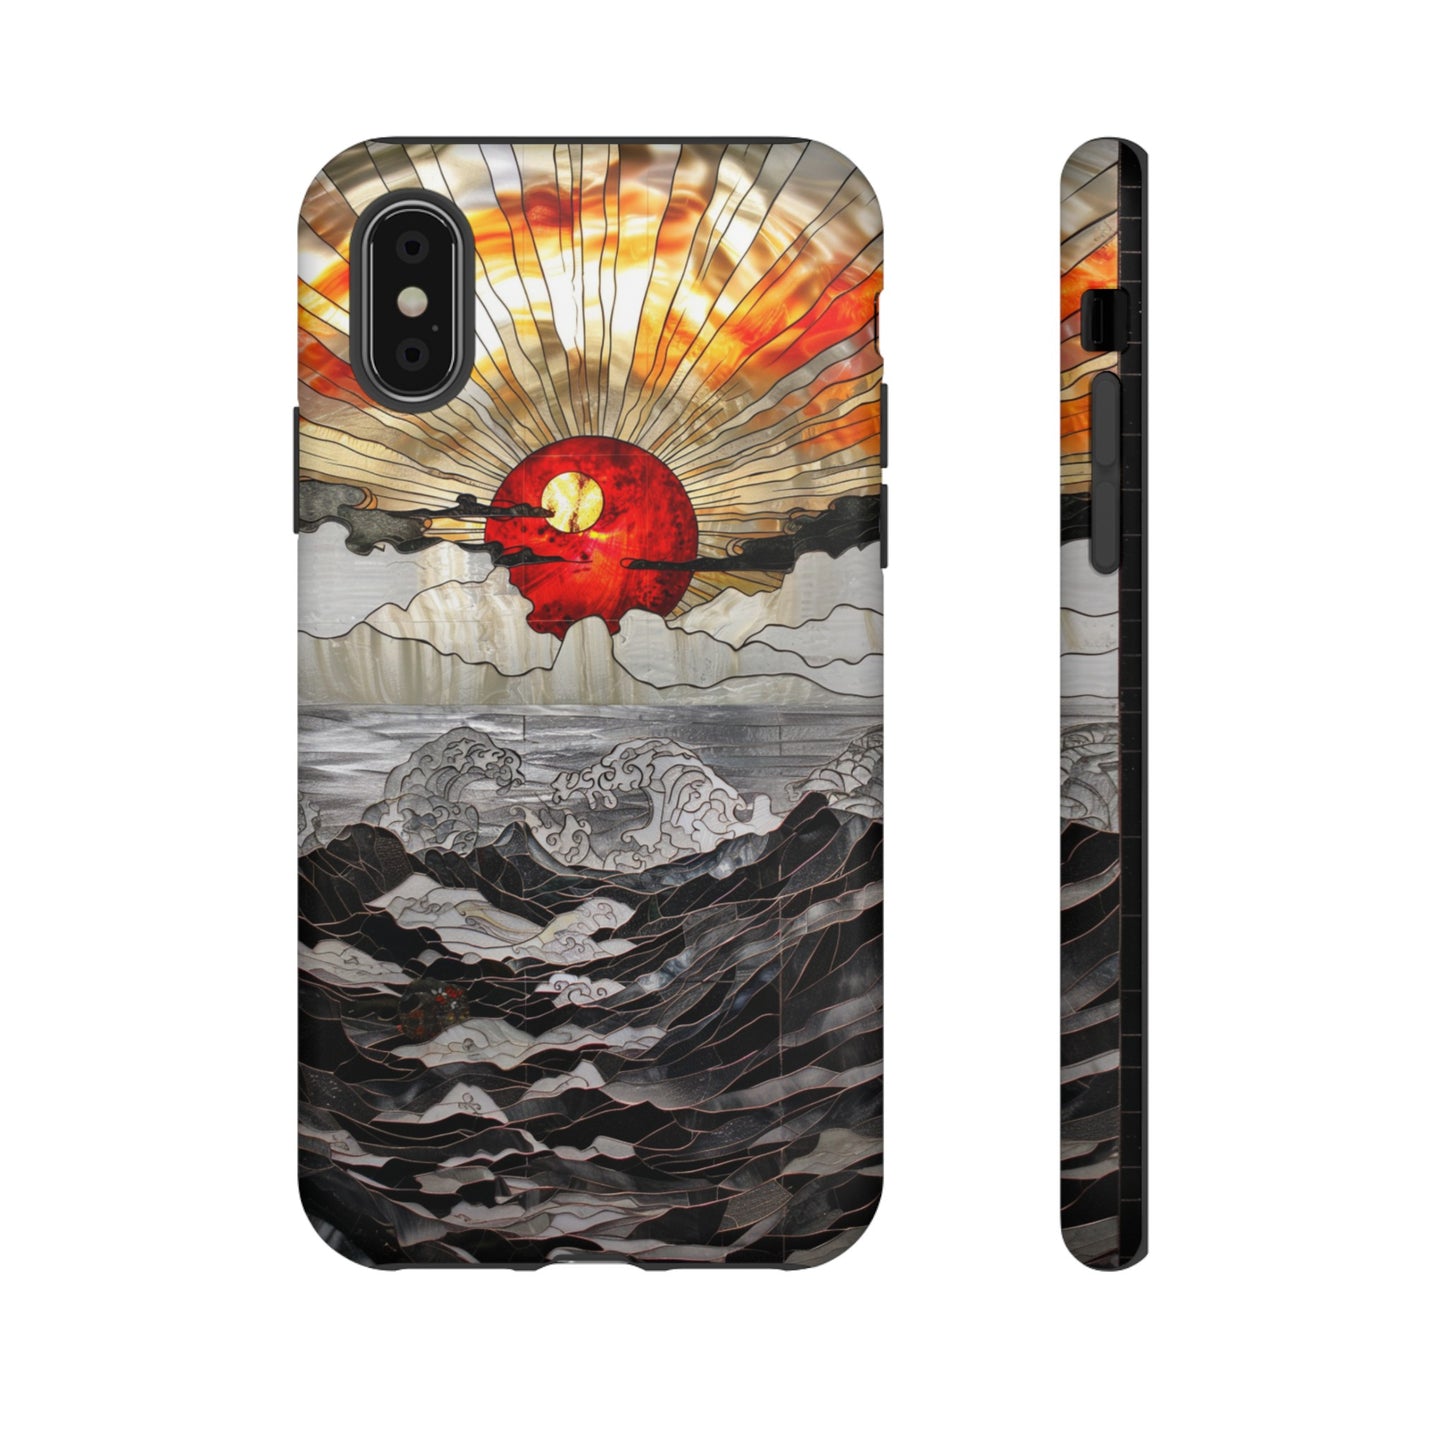 Japanese art phone case for iPhone 12 case